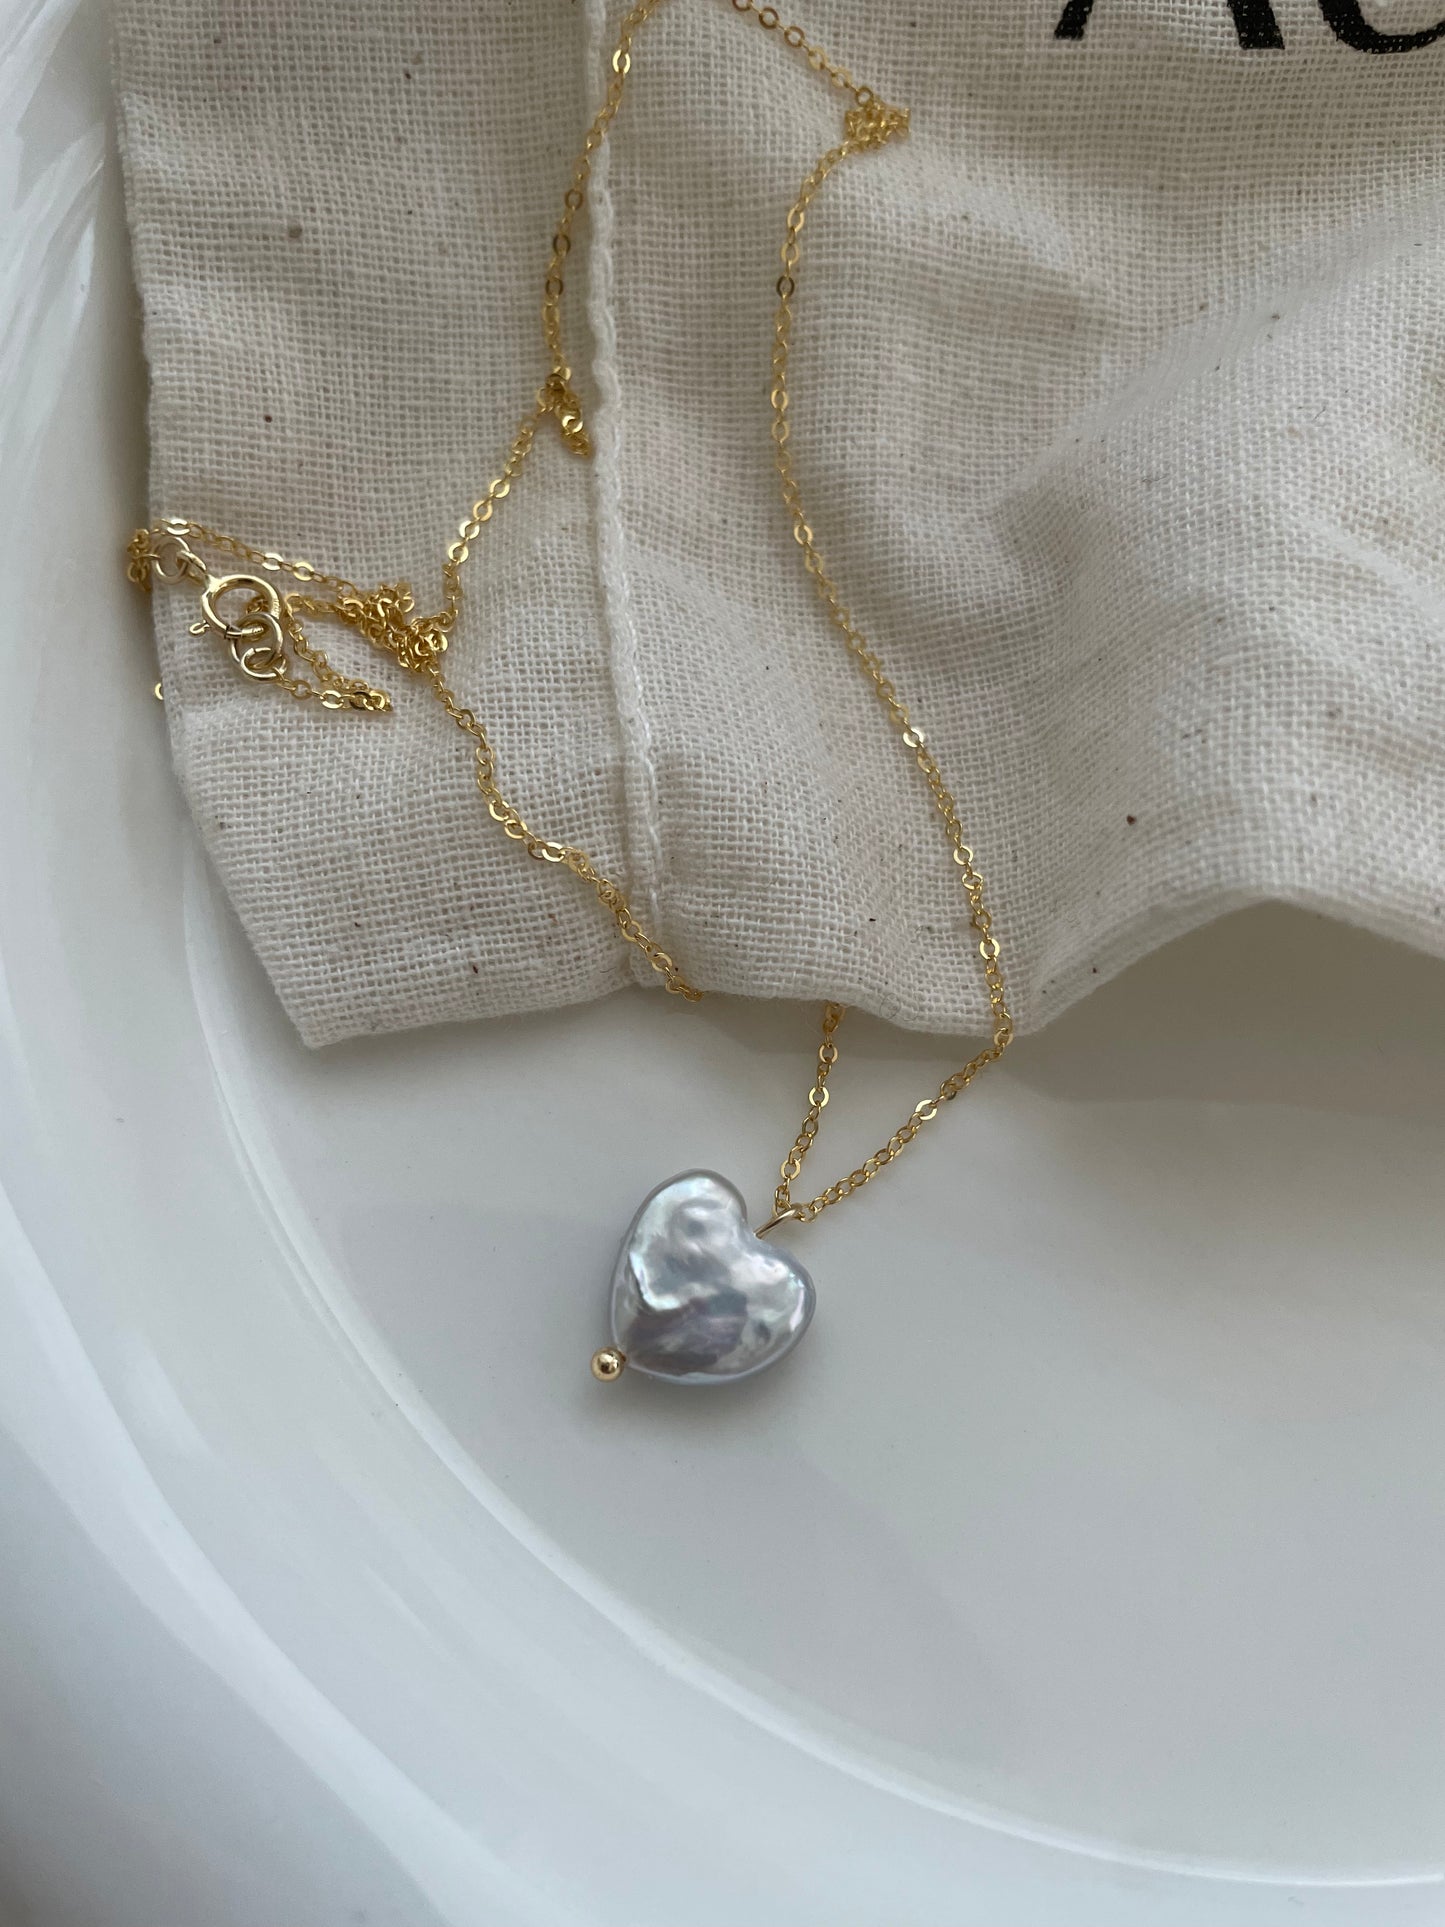 Heart Baroque Pearl Necklace with 14K Gold Spring Ring Clasp